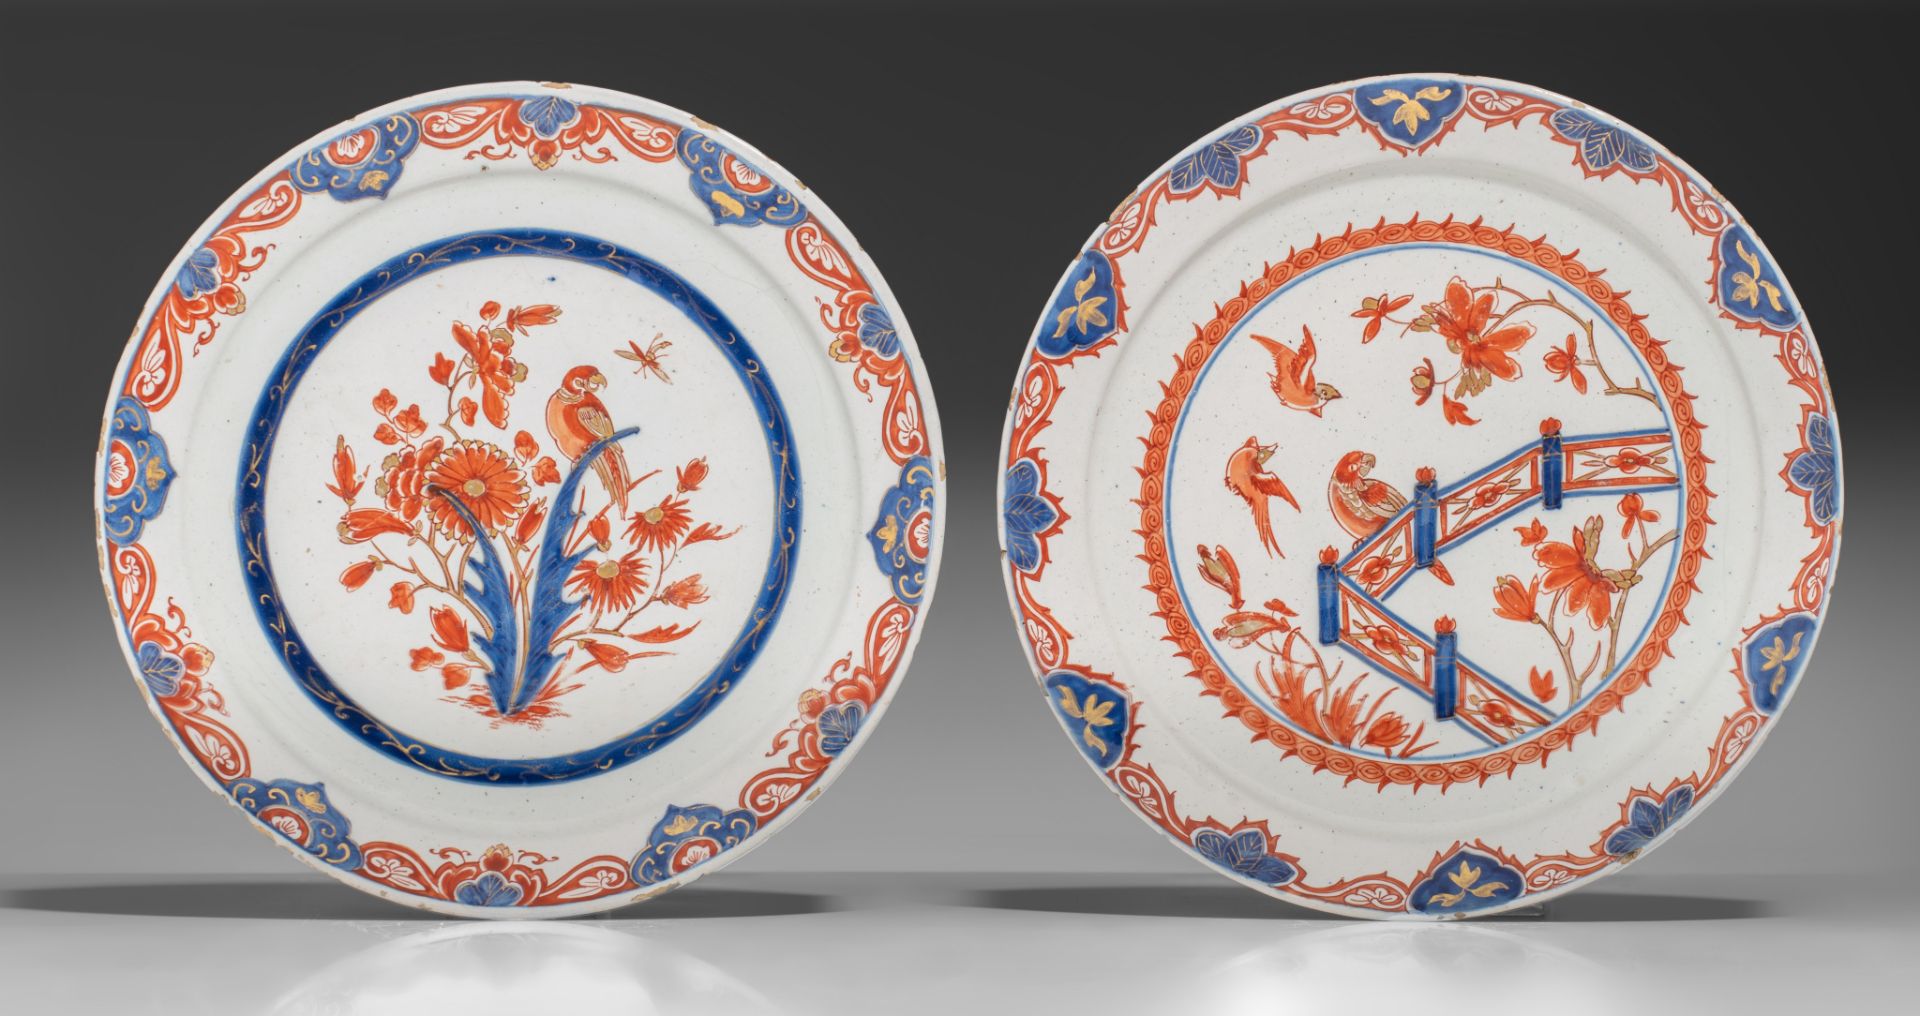 A various collection of 17th/18thC Dutch Delft Imari-style plates and a saucer, ø 22 / H 6 cm - Image 4 of 14